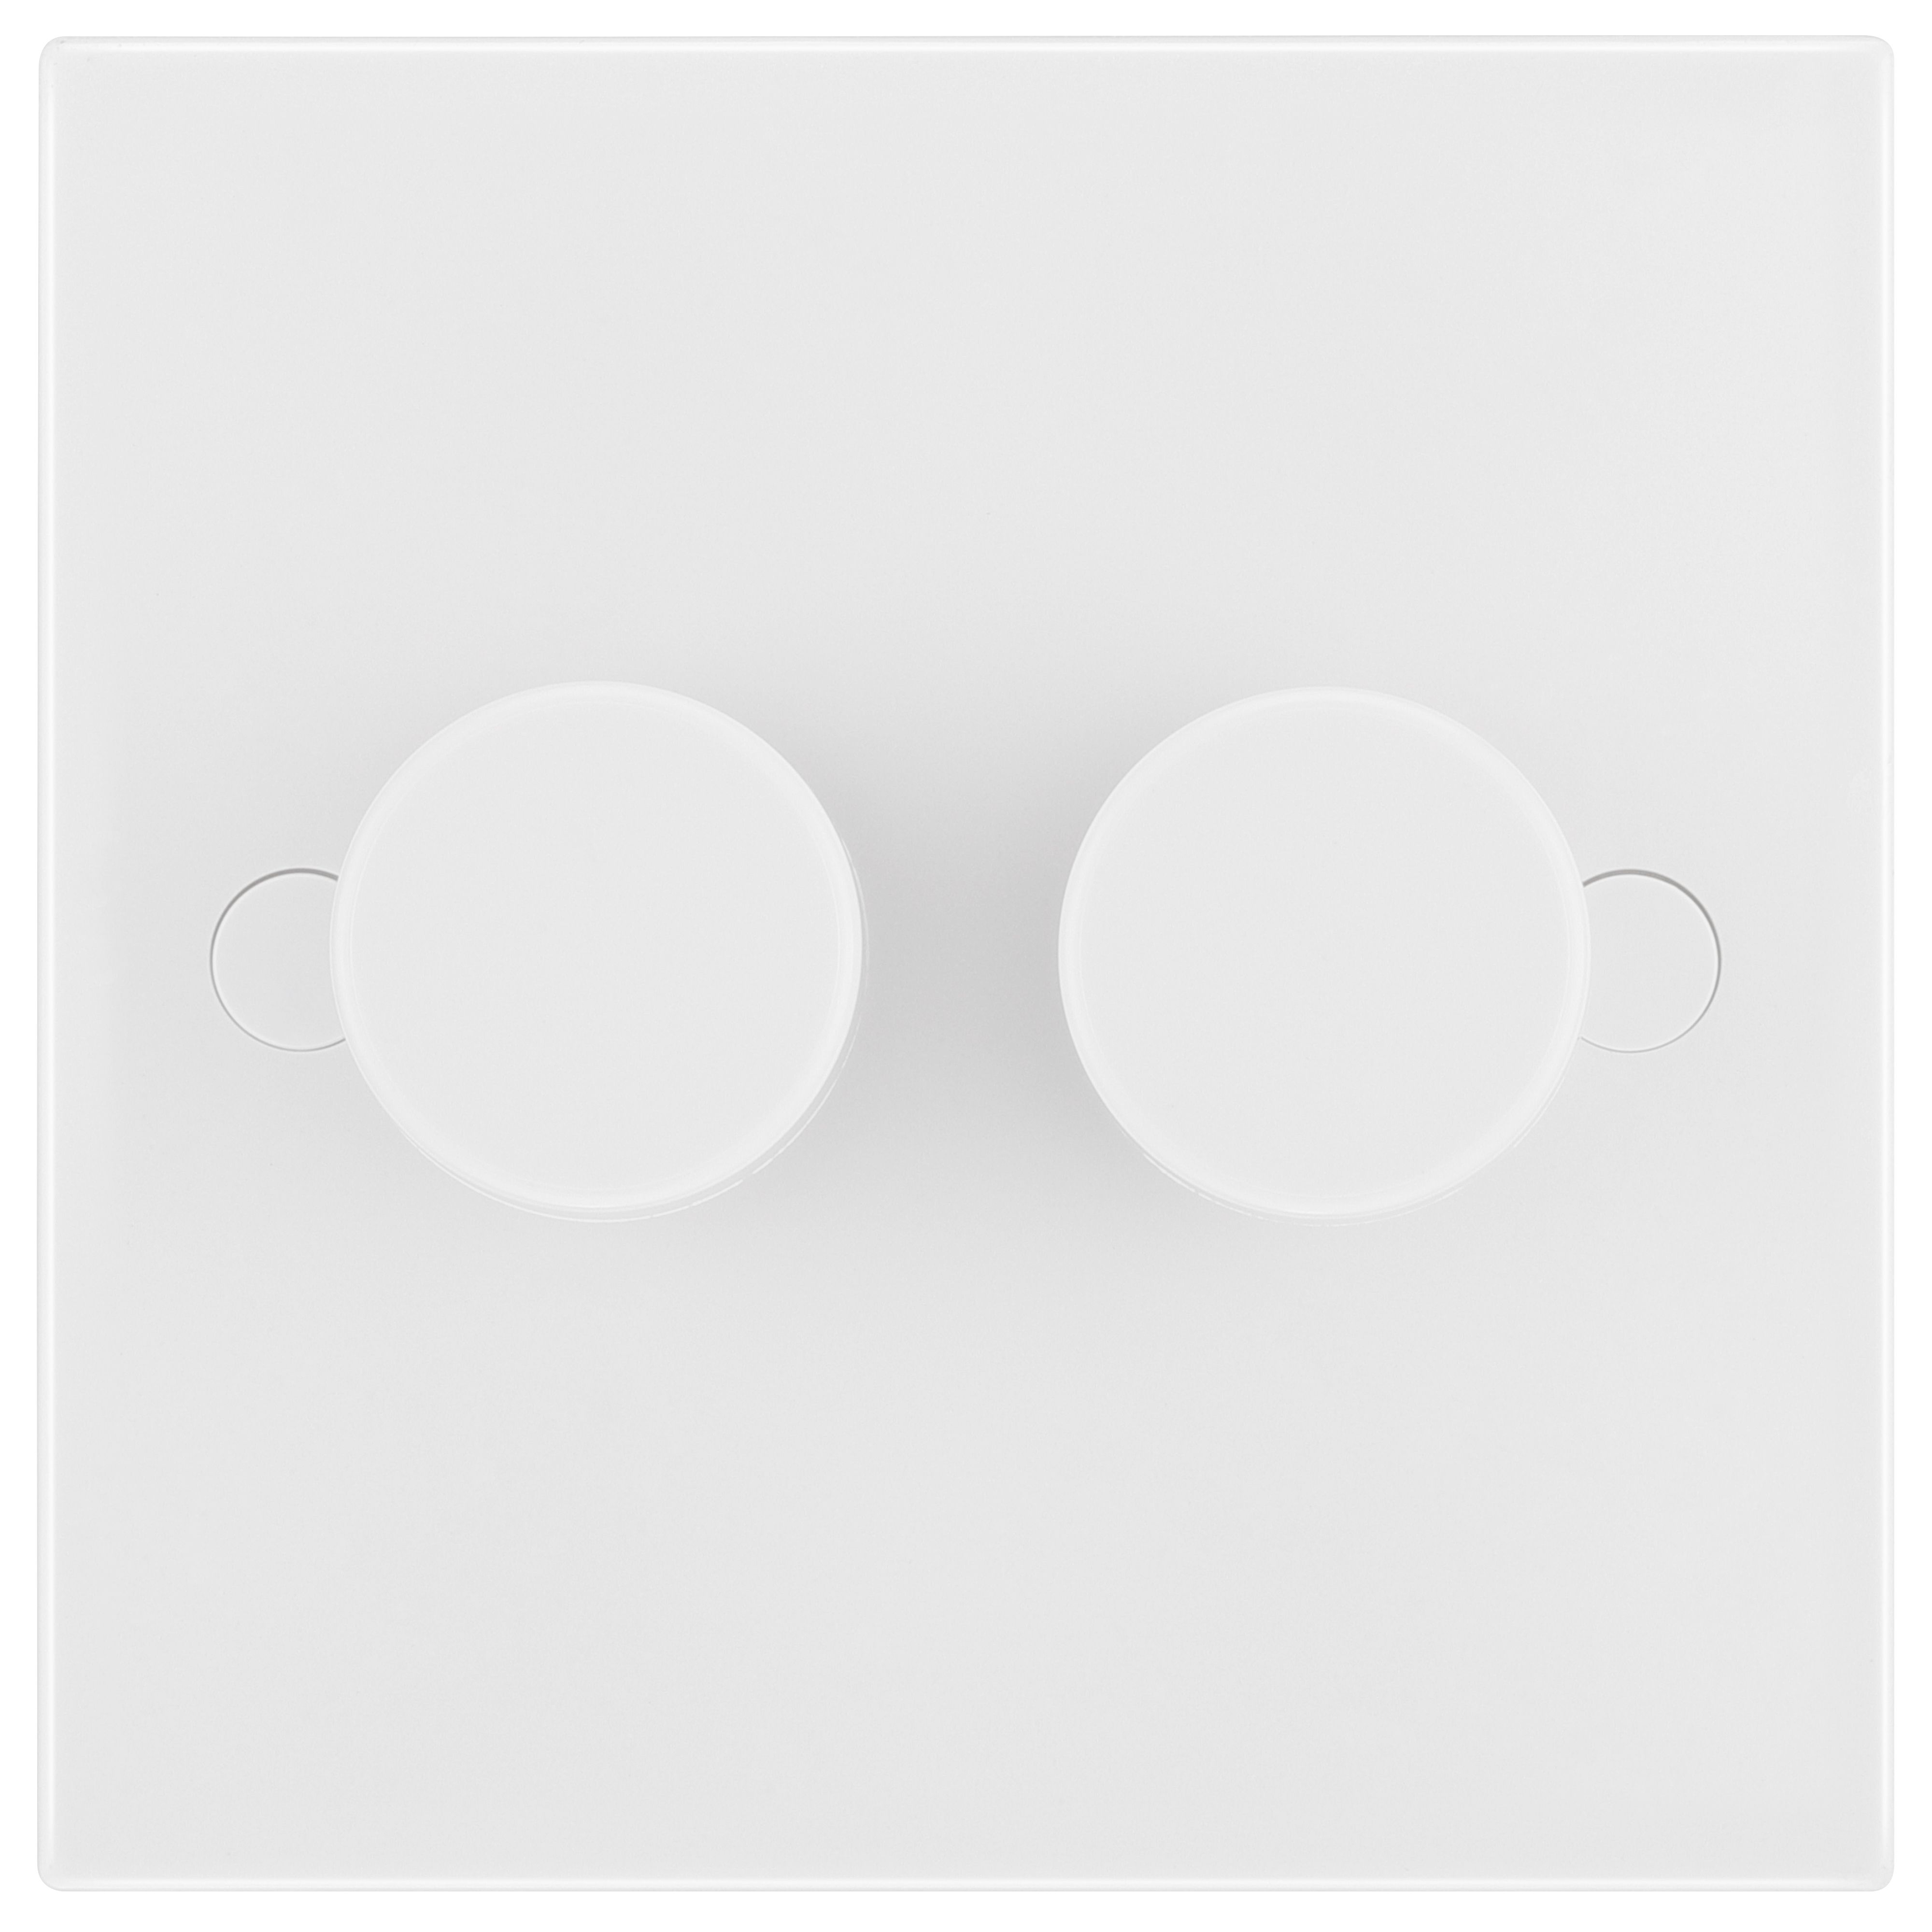 BG White profile Double 2 way 400W Dimmer switch